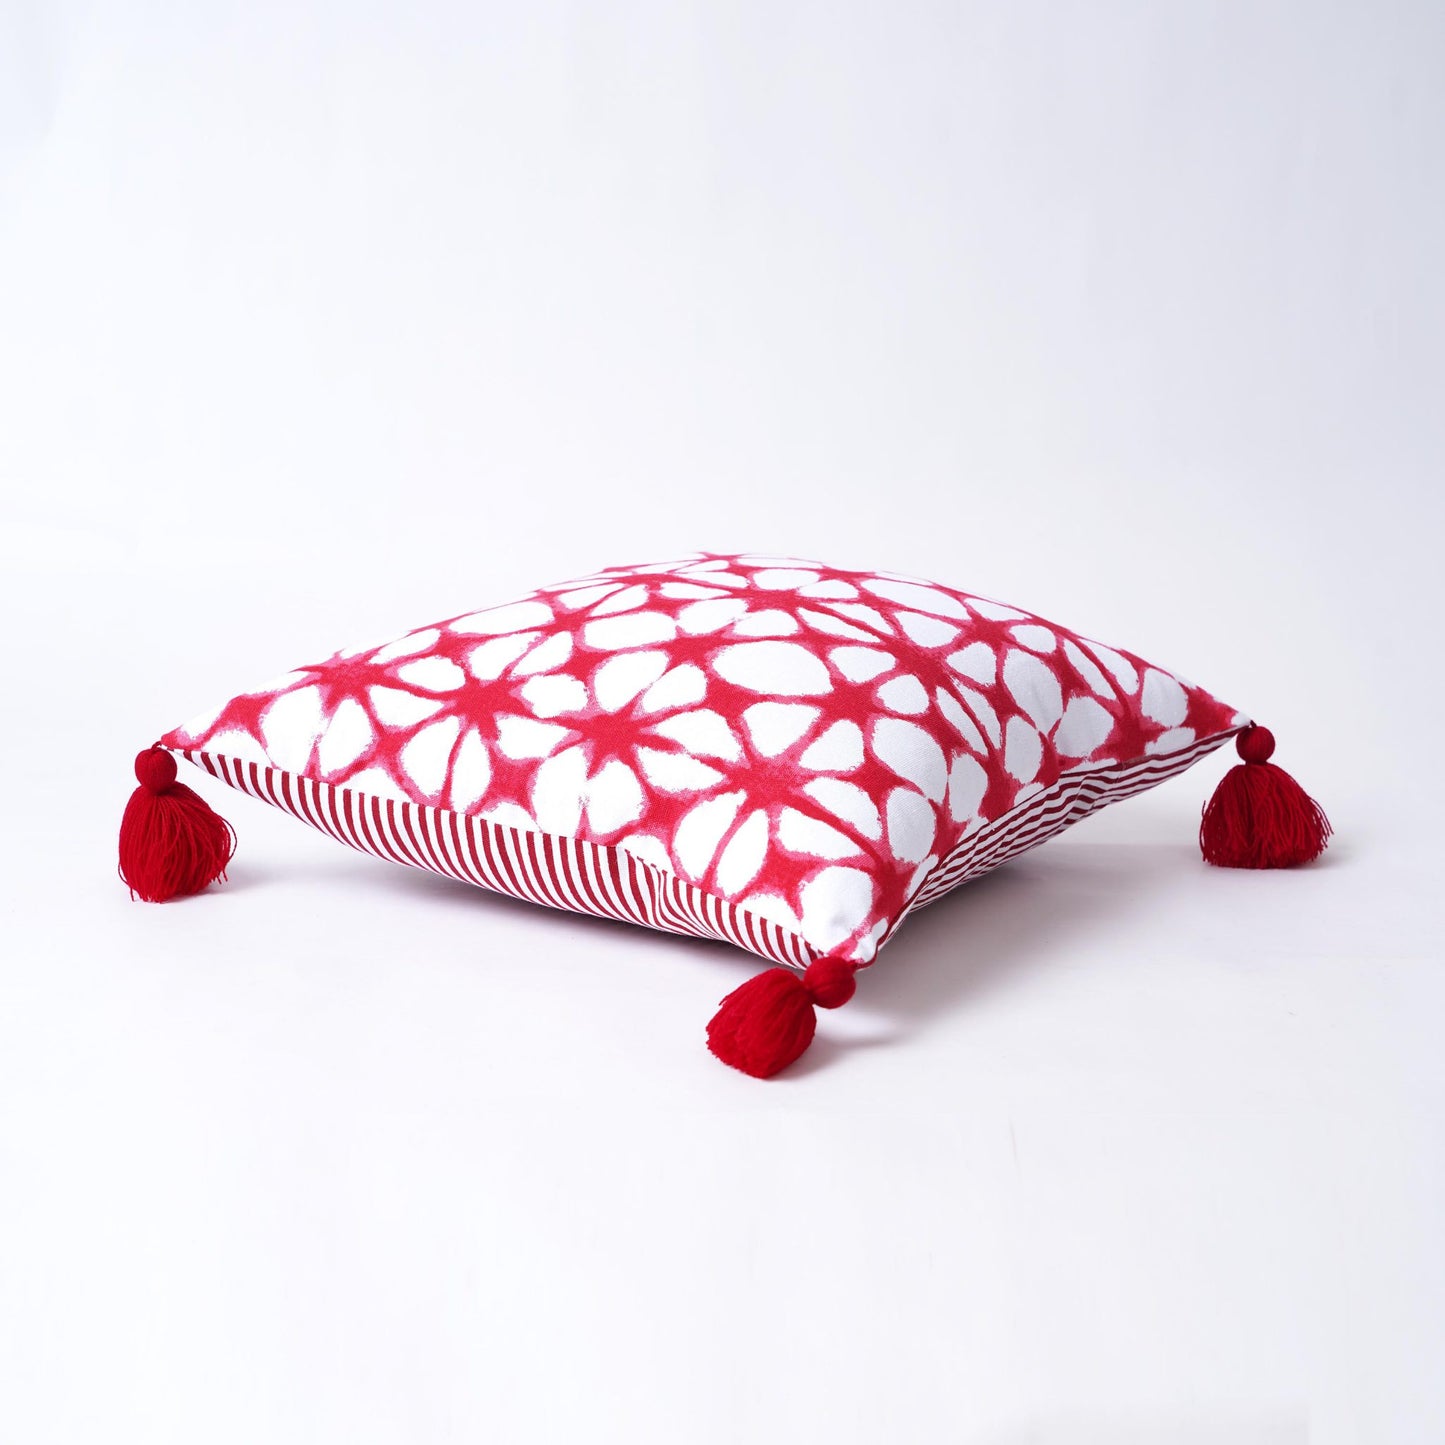 Christmas pillow cover, Tie dye pattern, Red and white, standard size 16X16 inches, other sizes available